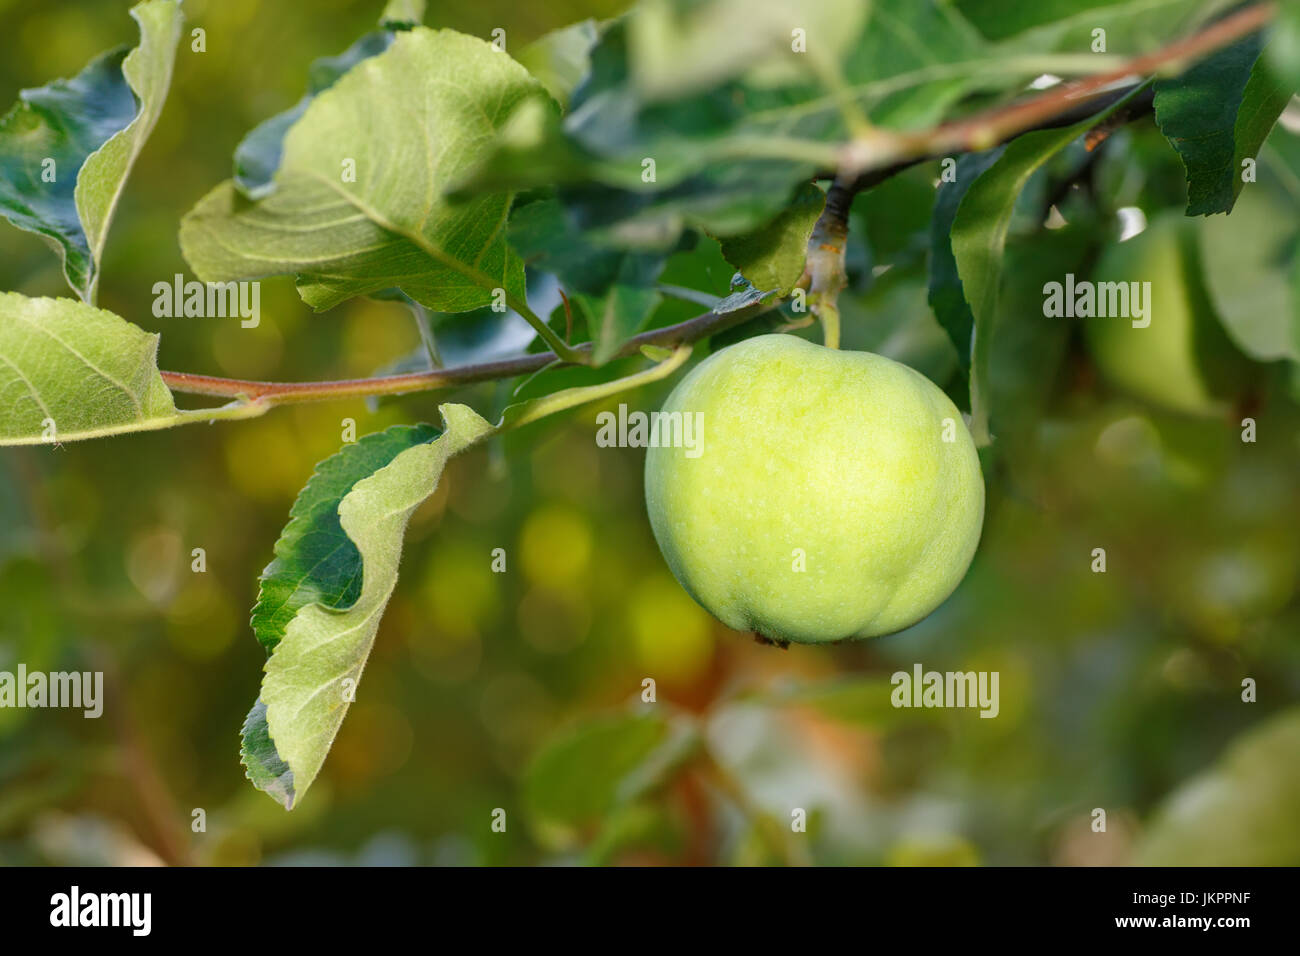 green apple on a branch Stock Photo